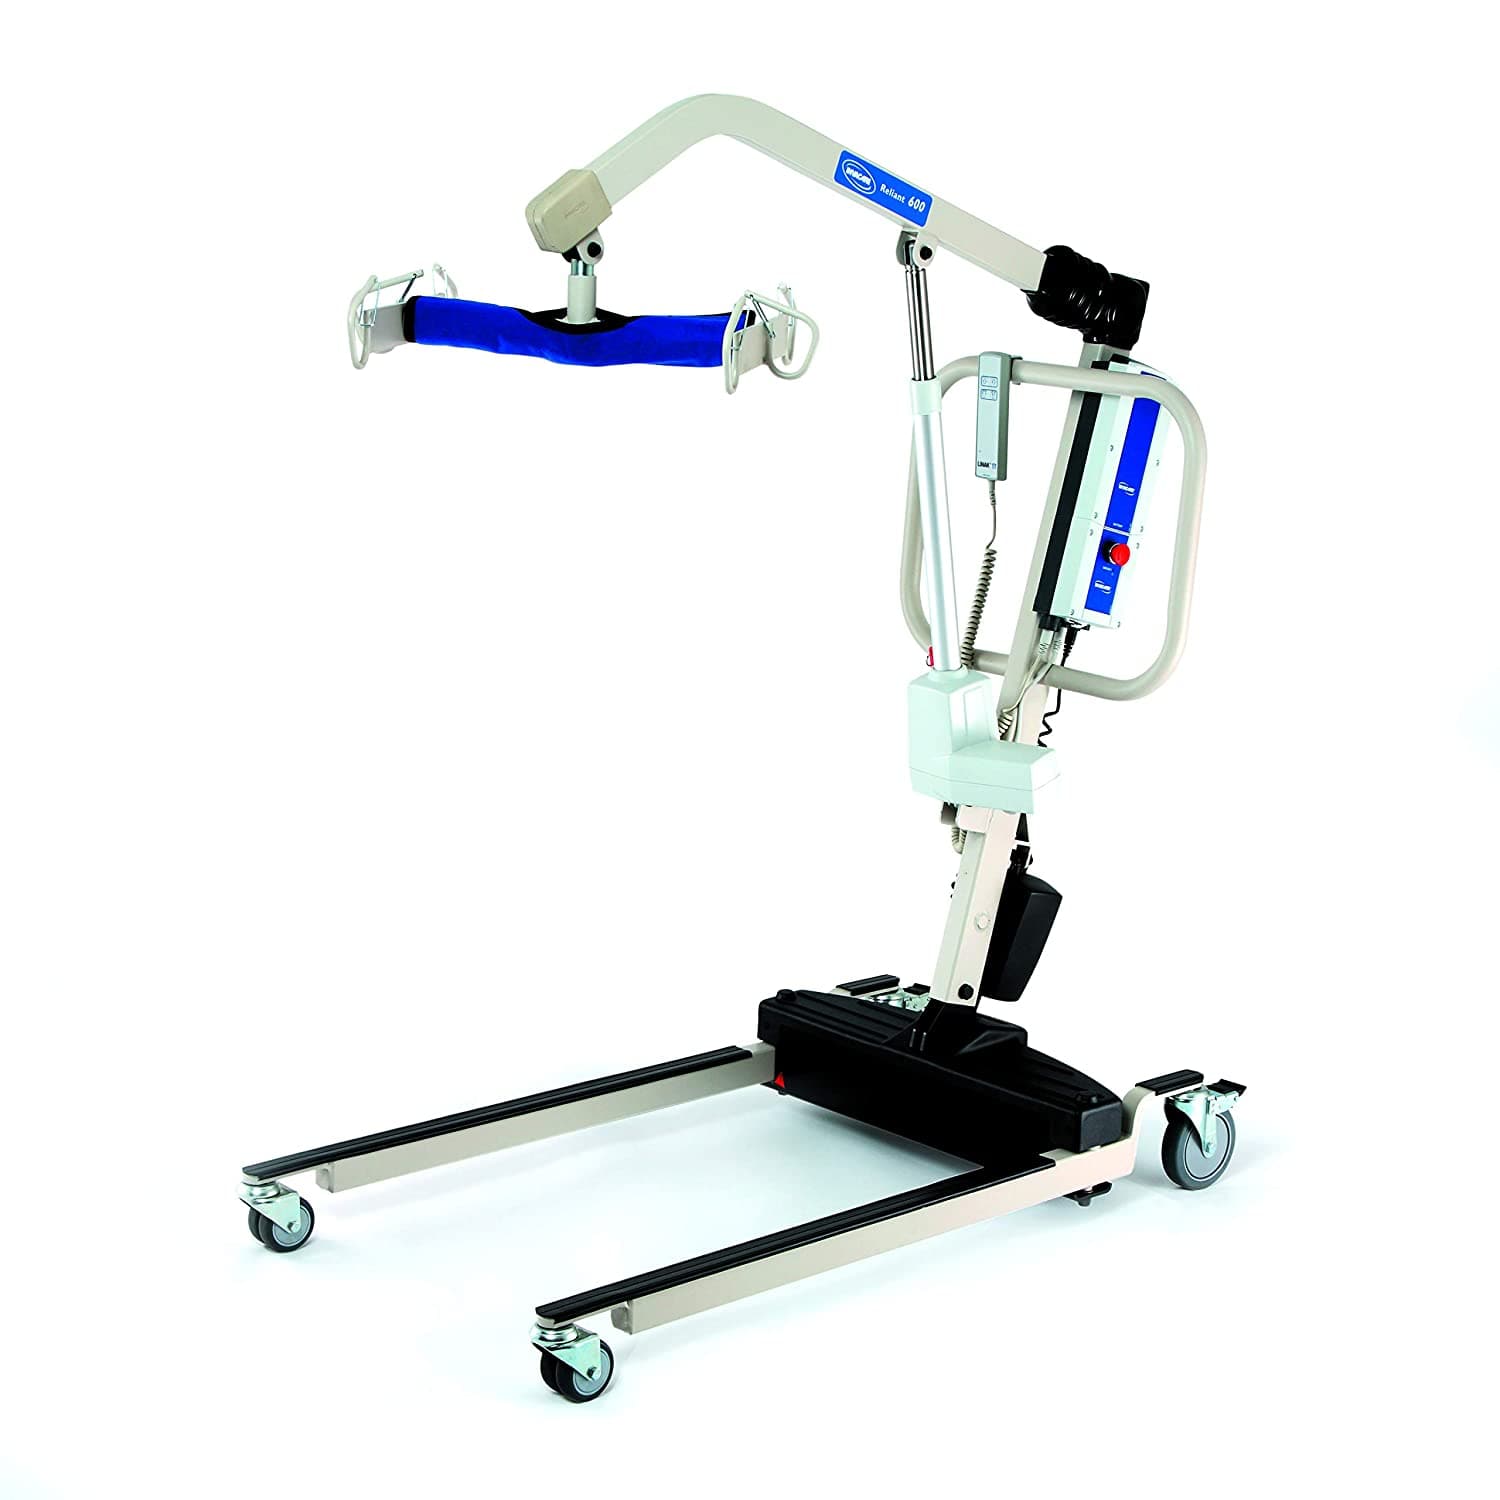 Invacare Reliant 600 Heavy-Duty Power Lift with Power Opening Low Base - Senior.com Patient Lifts